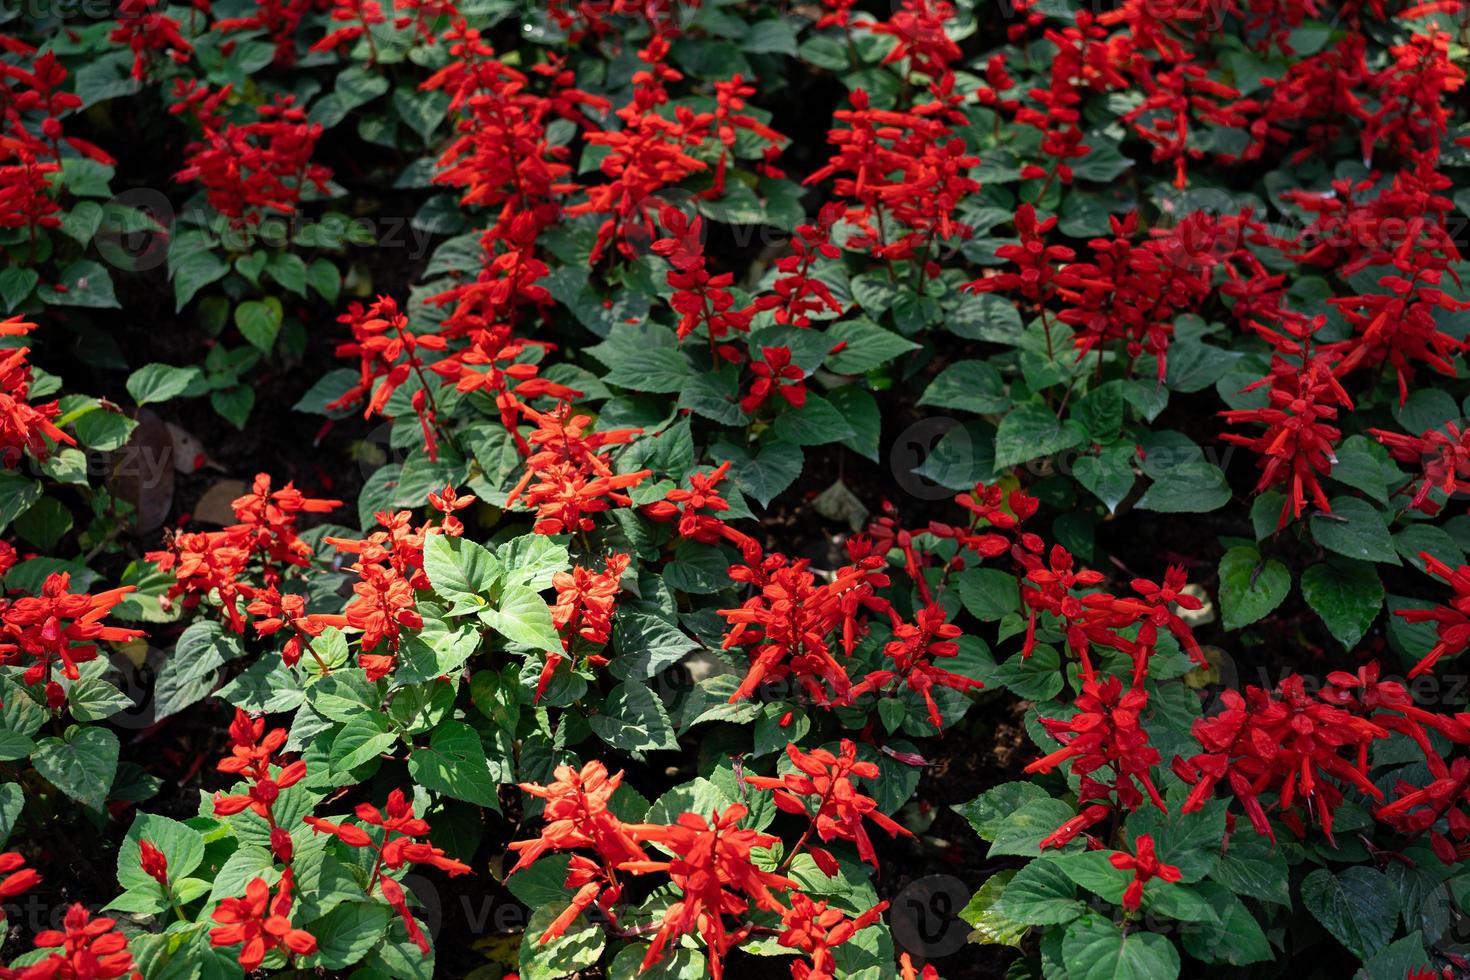 red flower spikes and dark green leaves of Red Salvia. Salvia splendens or the scarlet sage photo